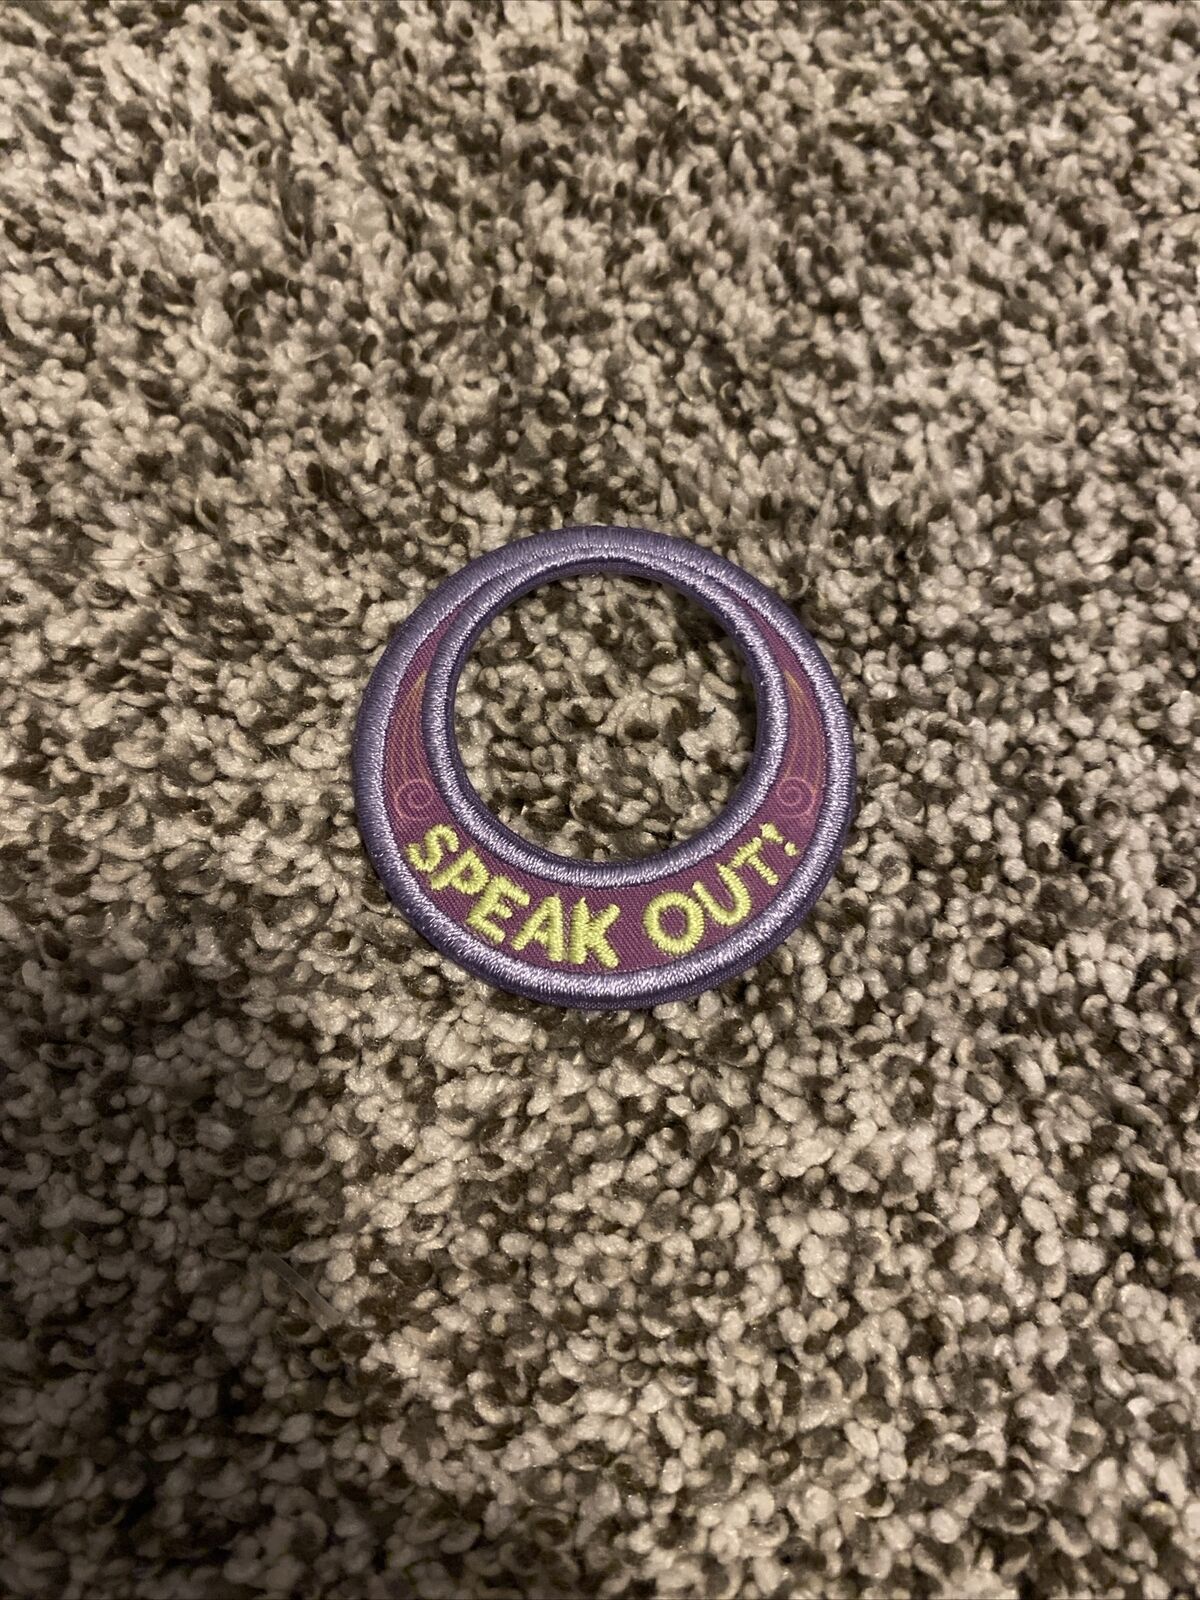 Speak Out Girl Scout Patch